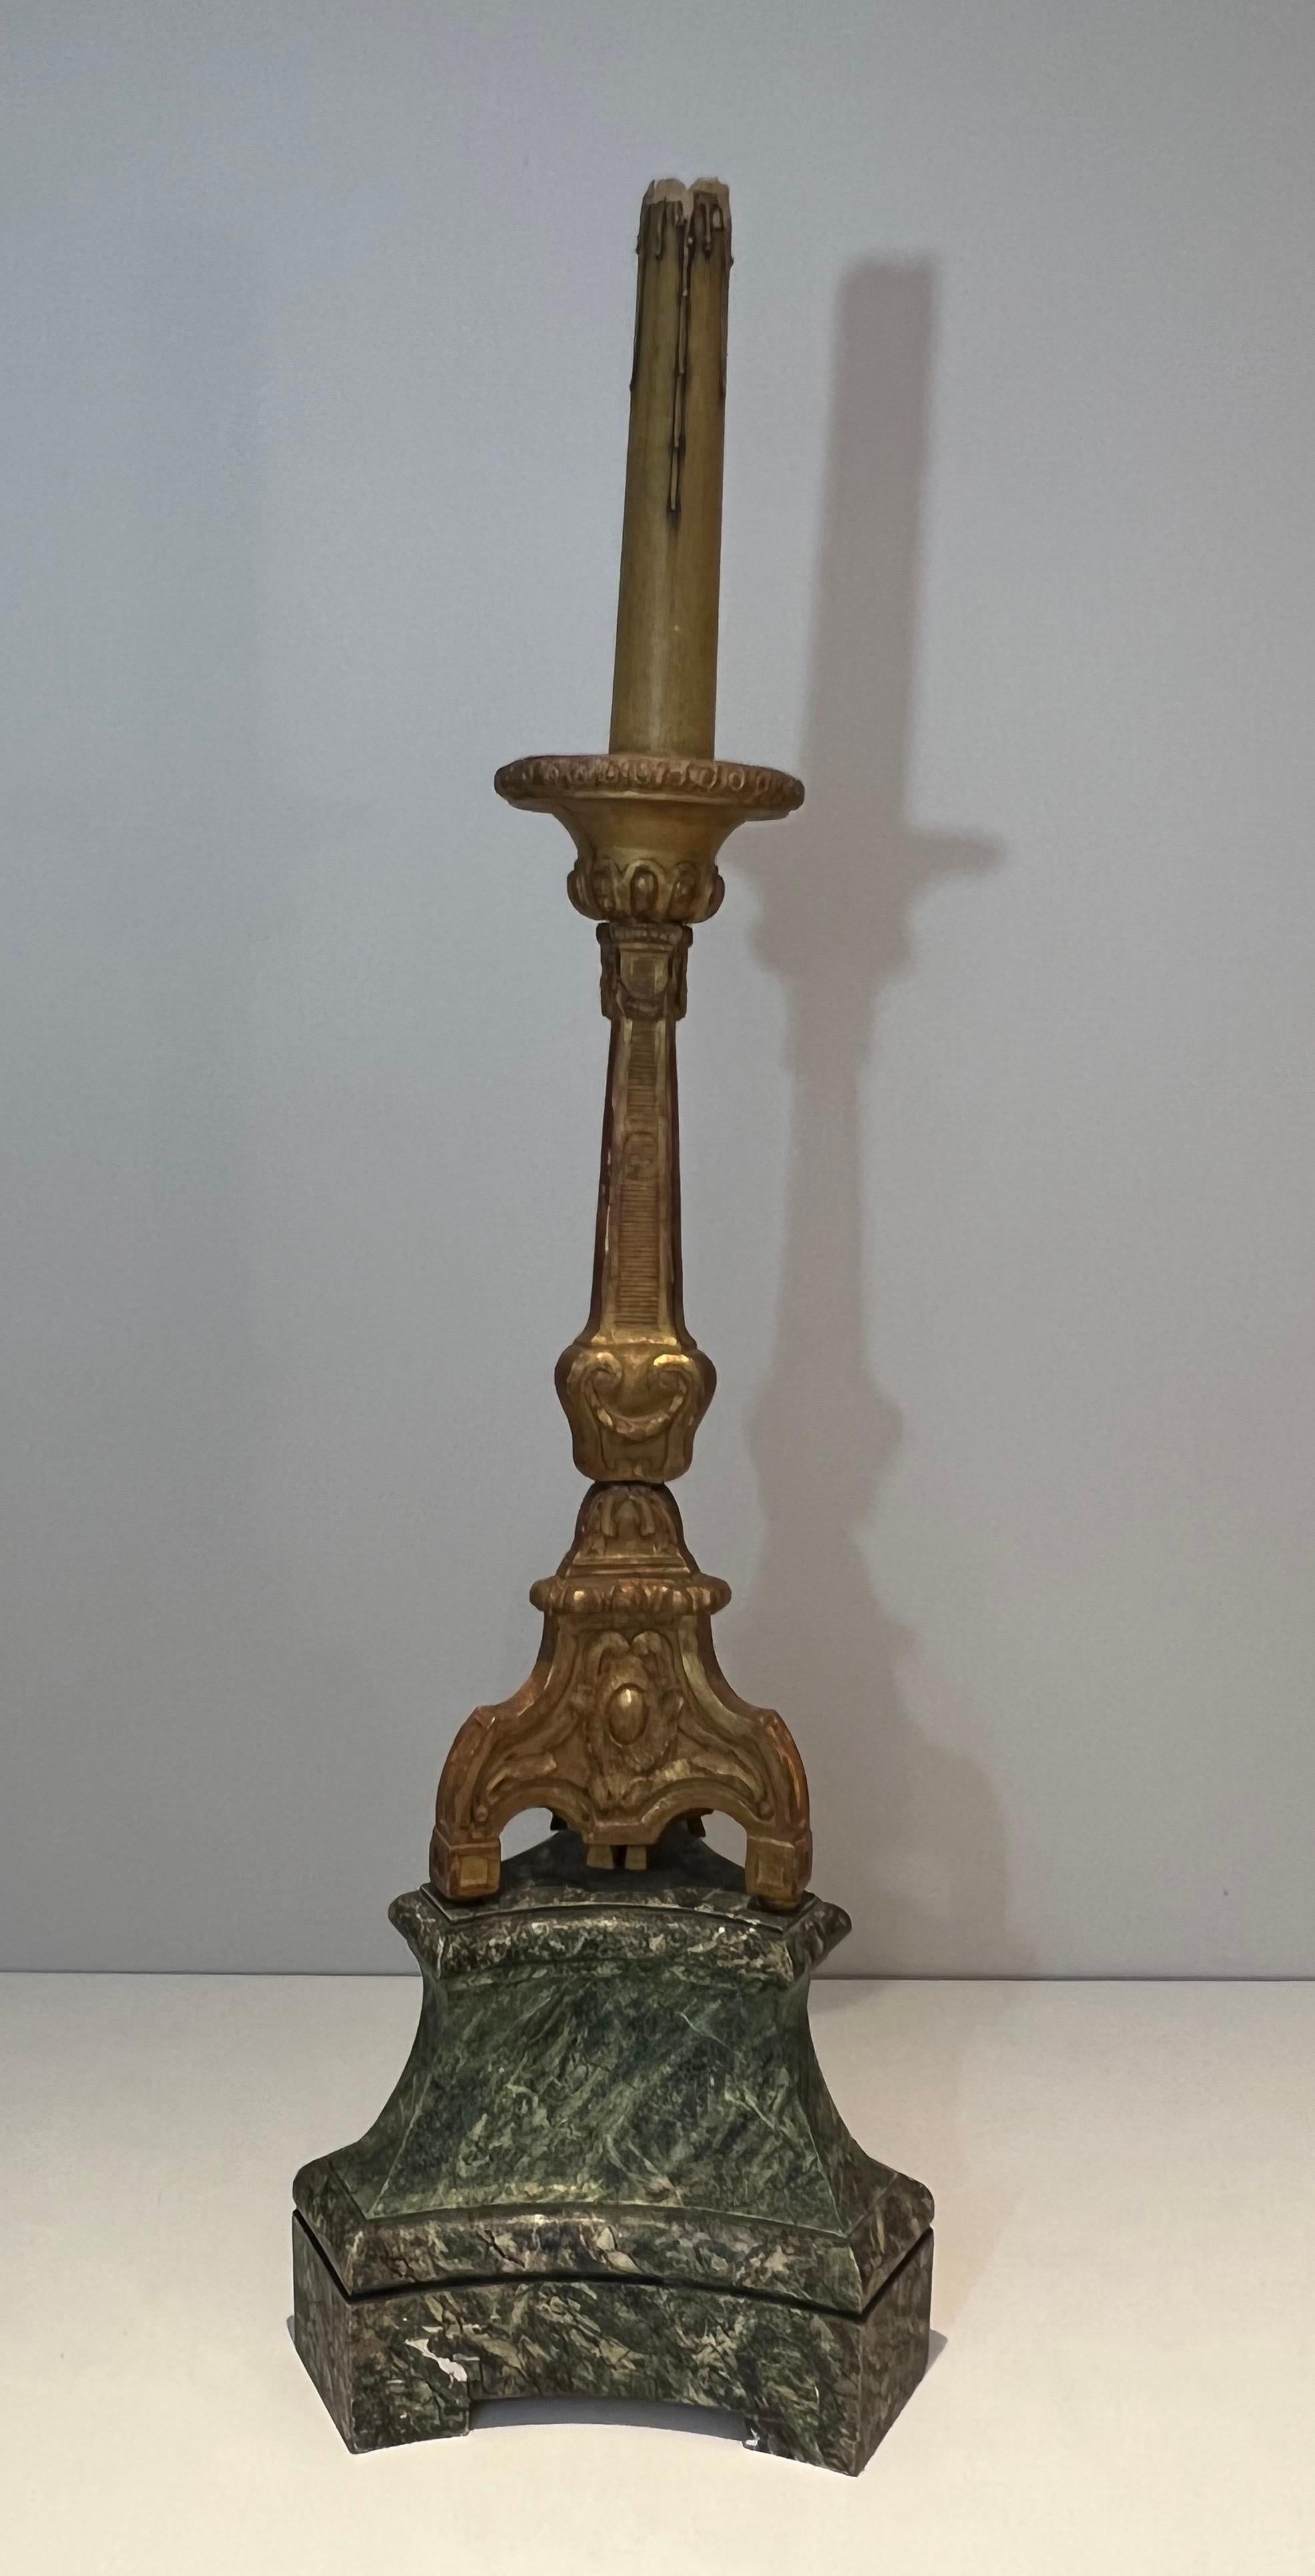 This decorative tall candelabra is made of a gilded carved wood on a patinated base. This is a French work. Circa 1900